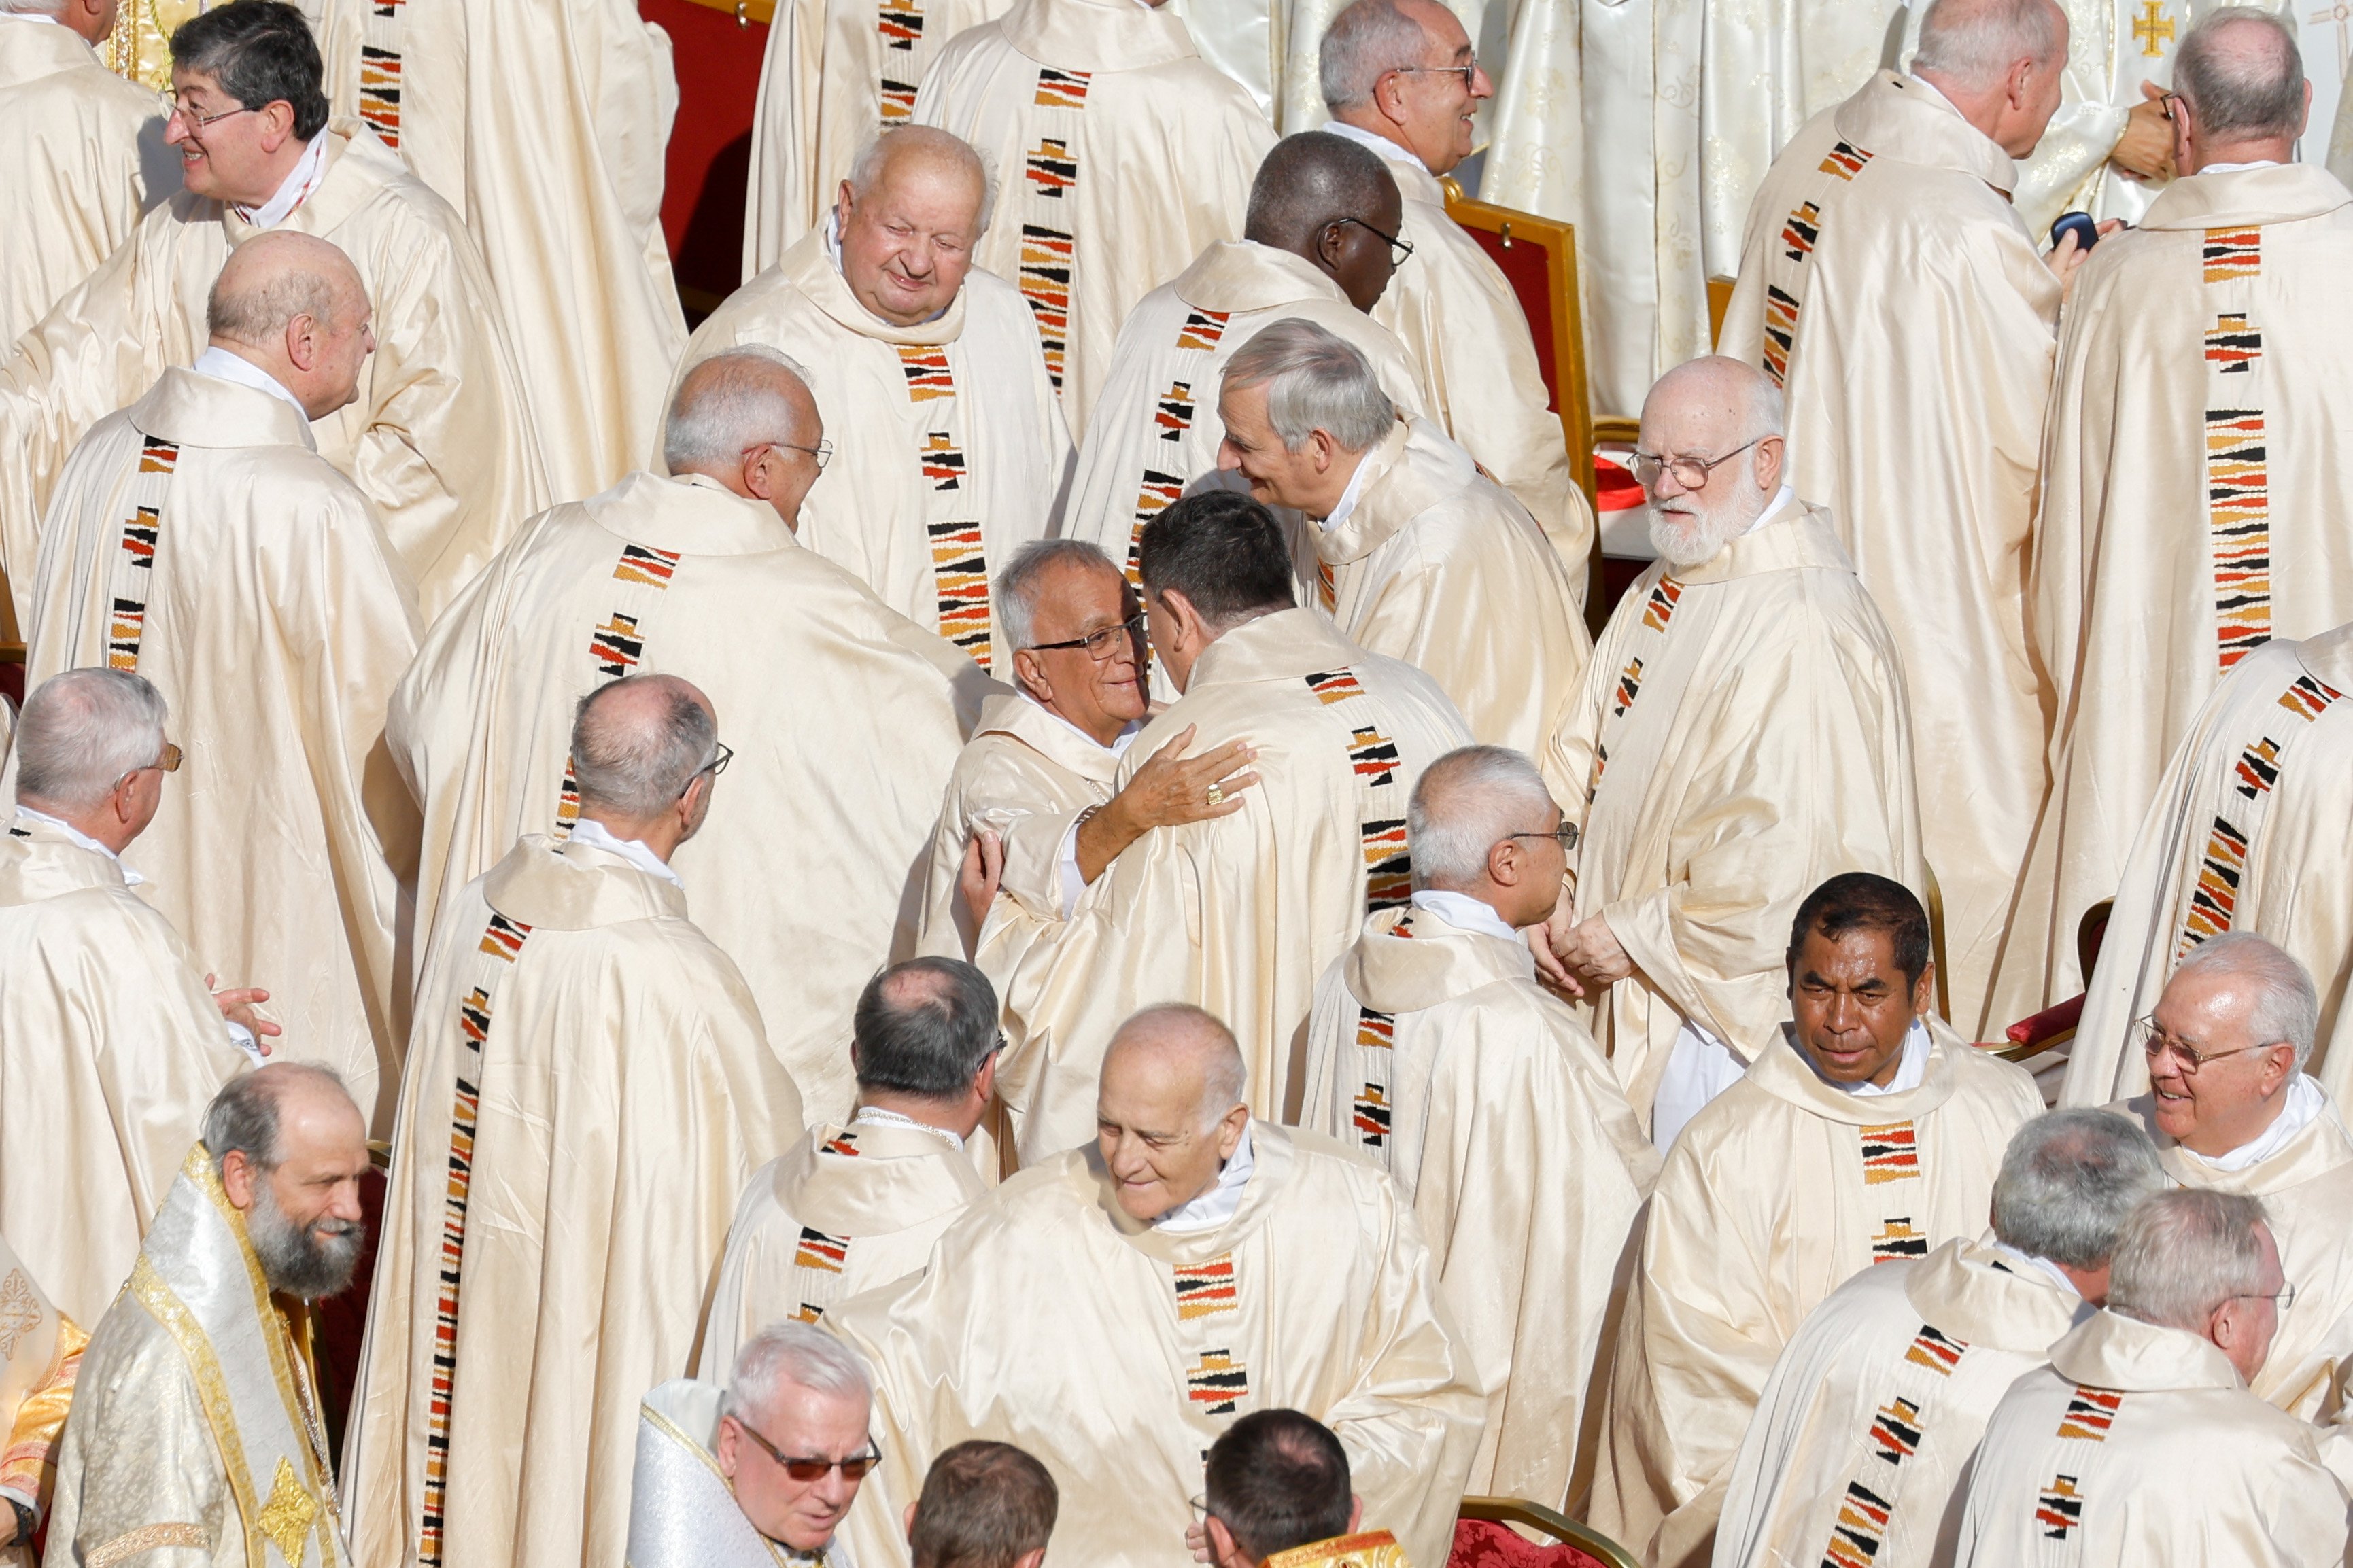 Cardinals and bishops exchange a sign of peace.